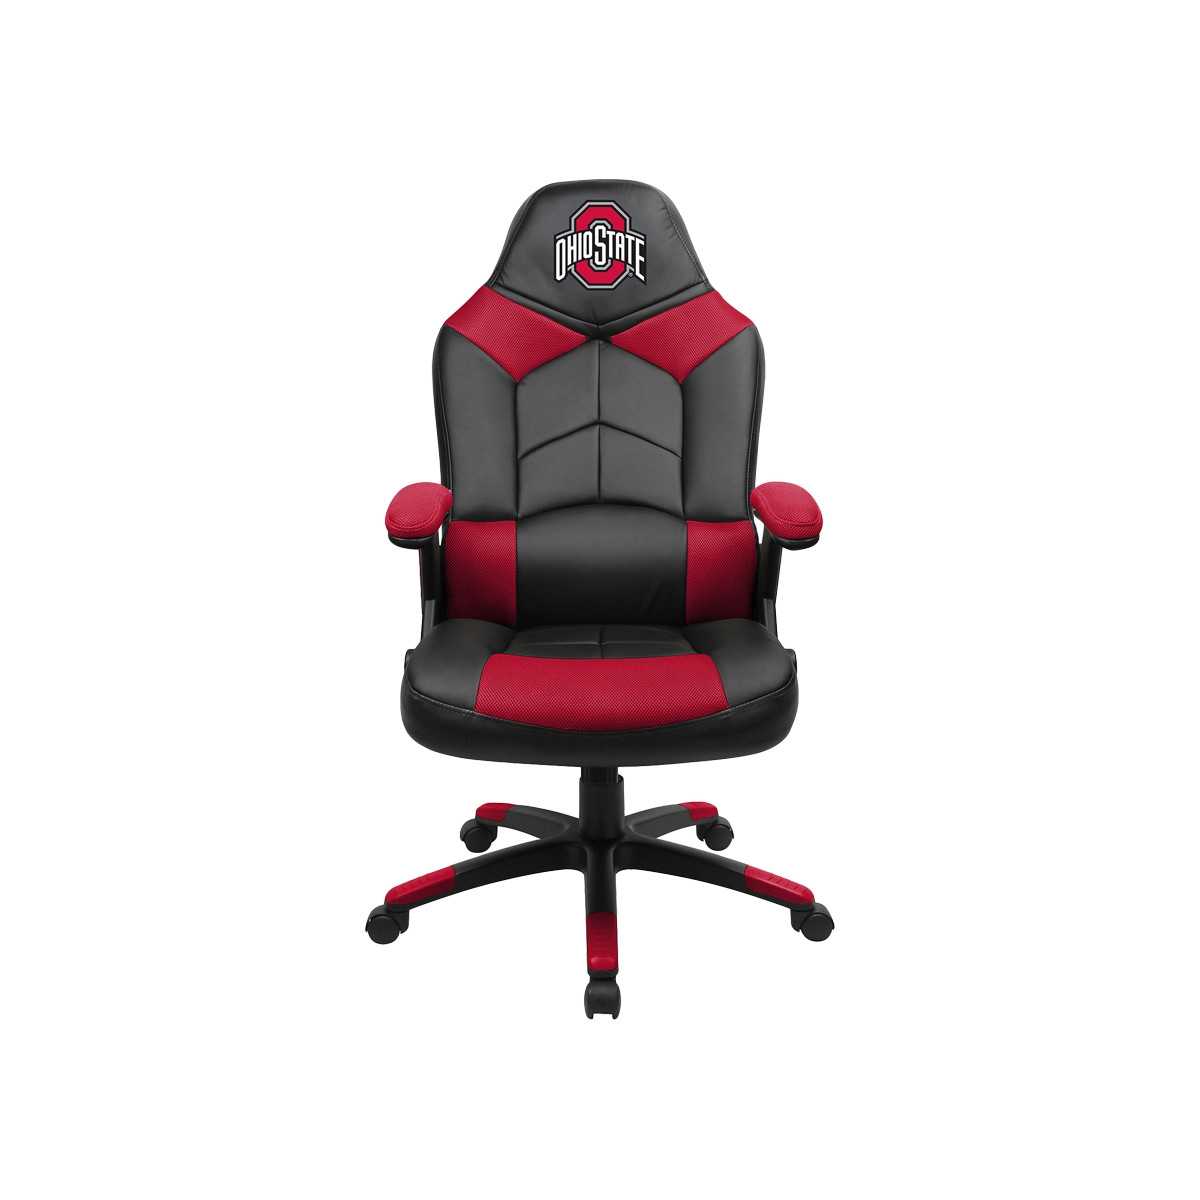 OHIO STATE OVERSIZED GAMING CHAIR